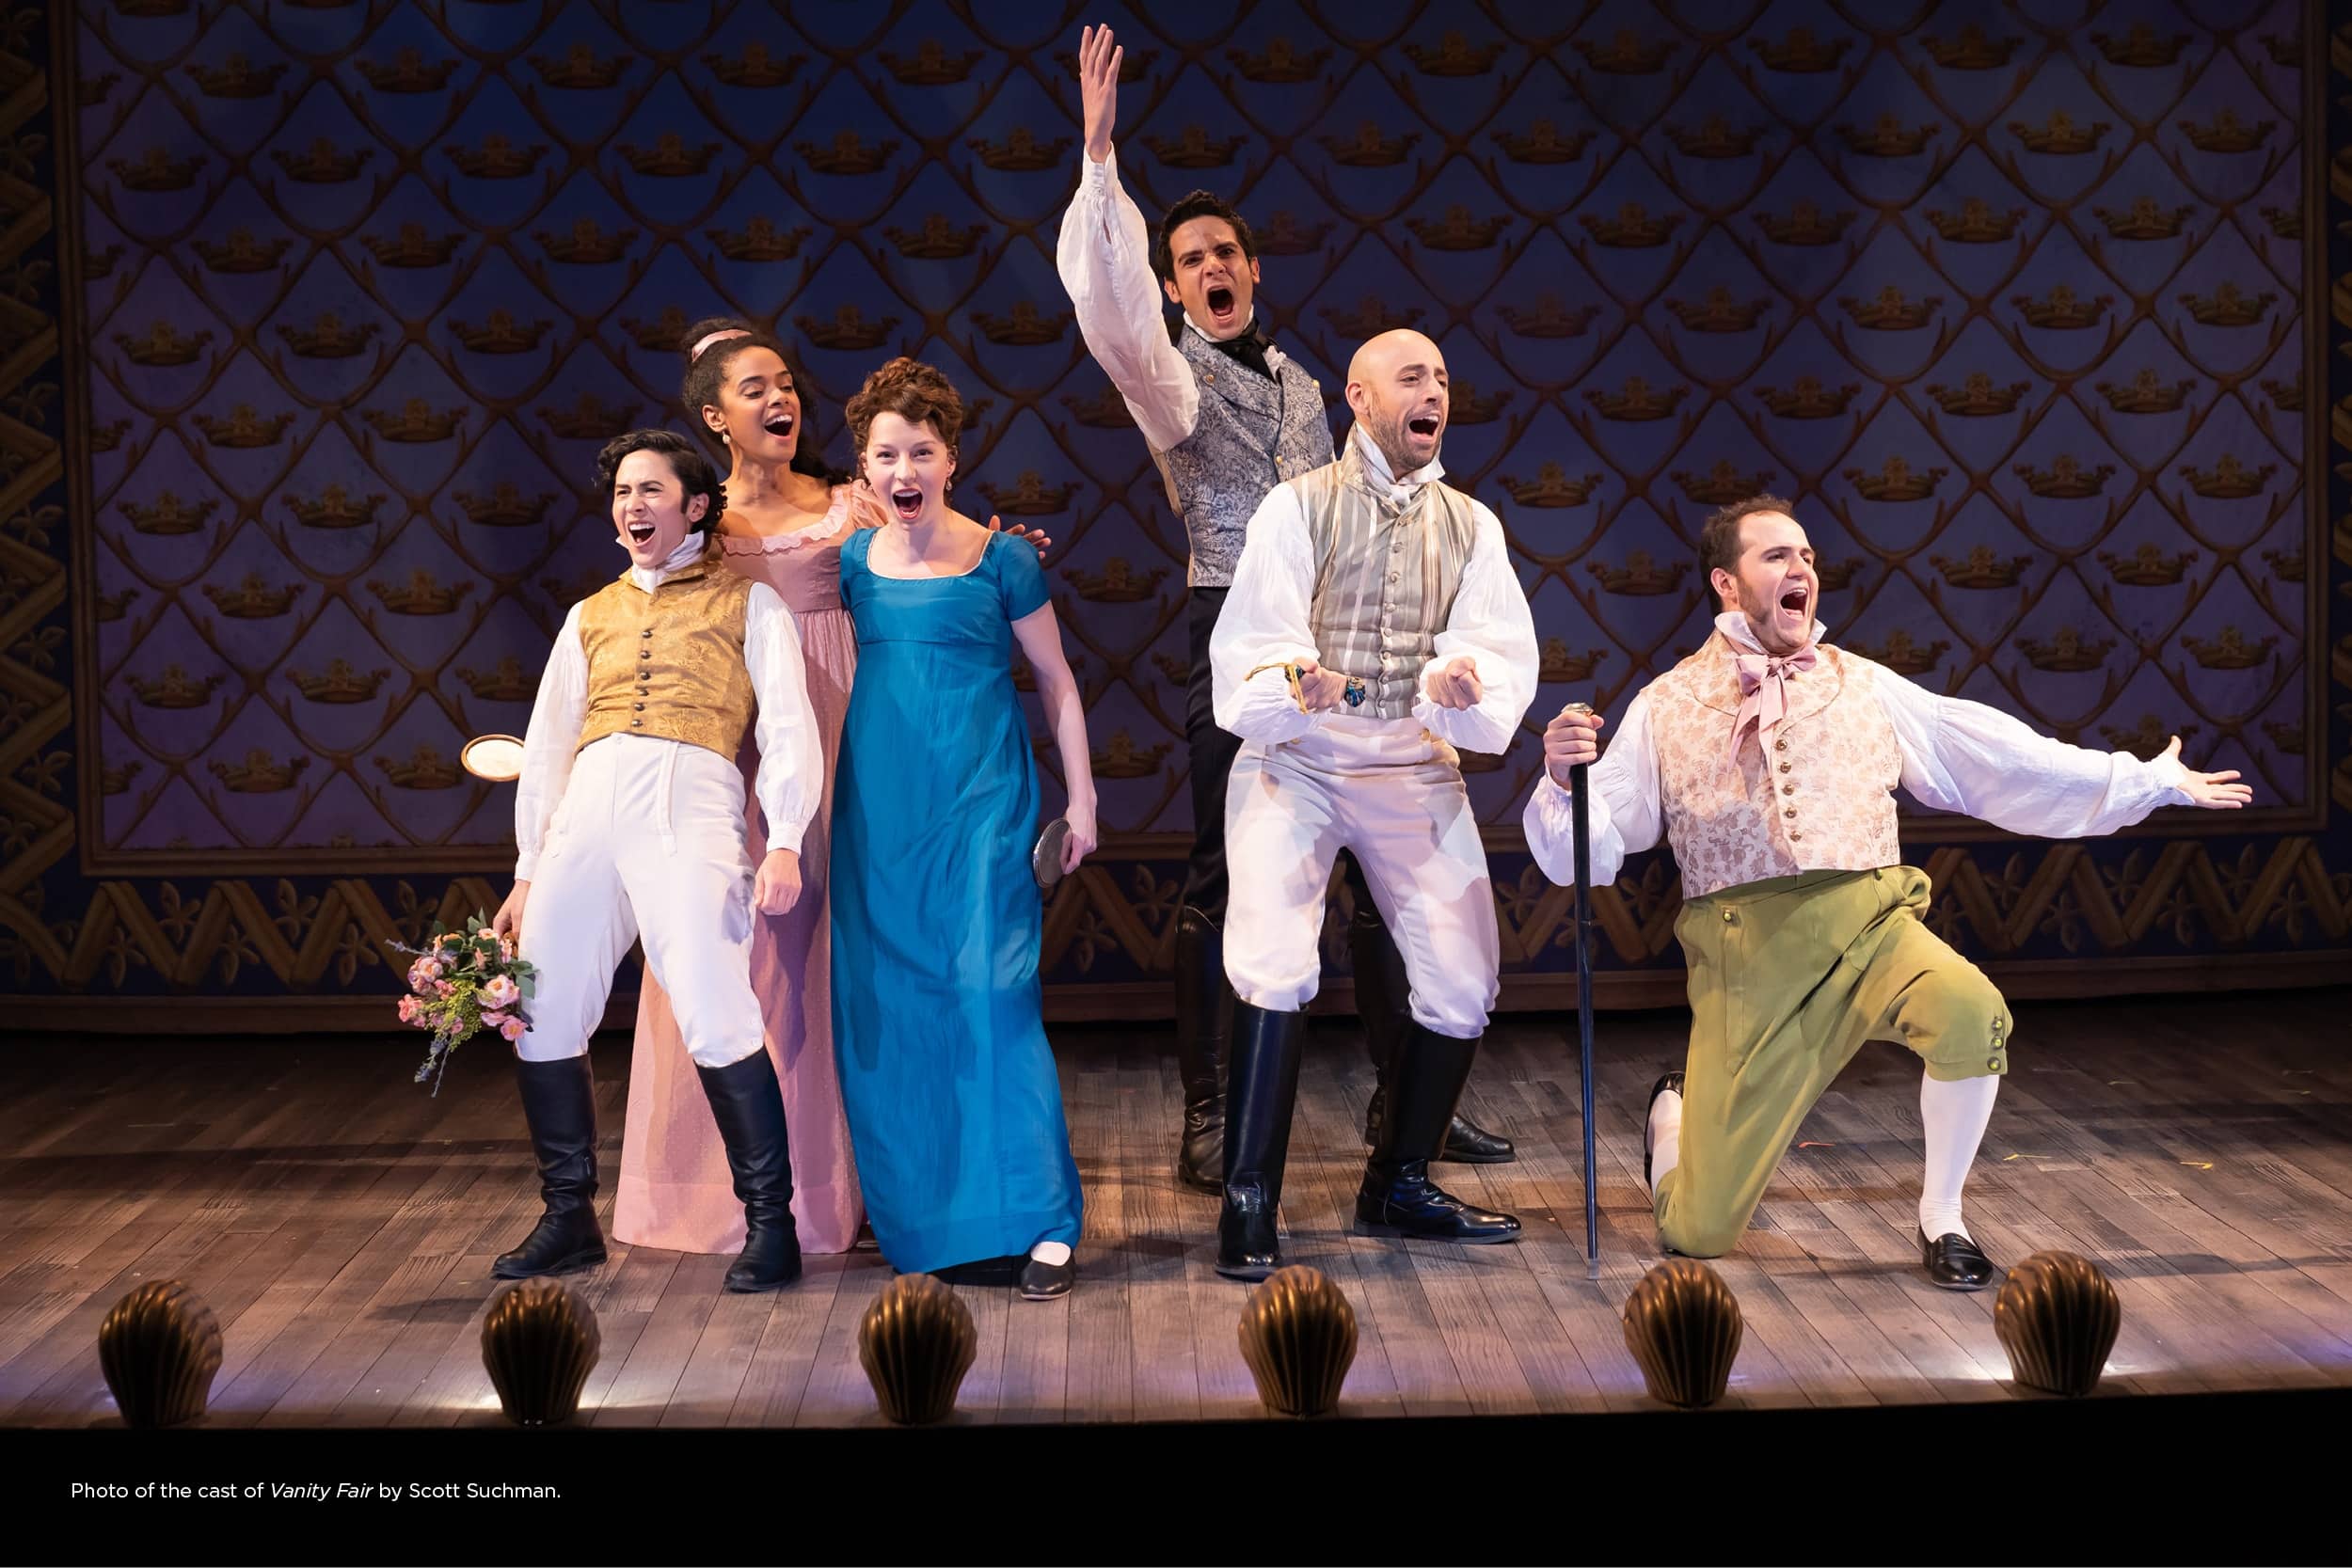 The cast of 'Vanity Fair' at the Shakespeare Theatre Company. Photo by Scott Suchman.